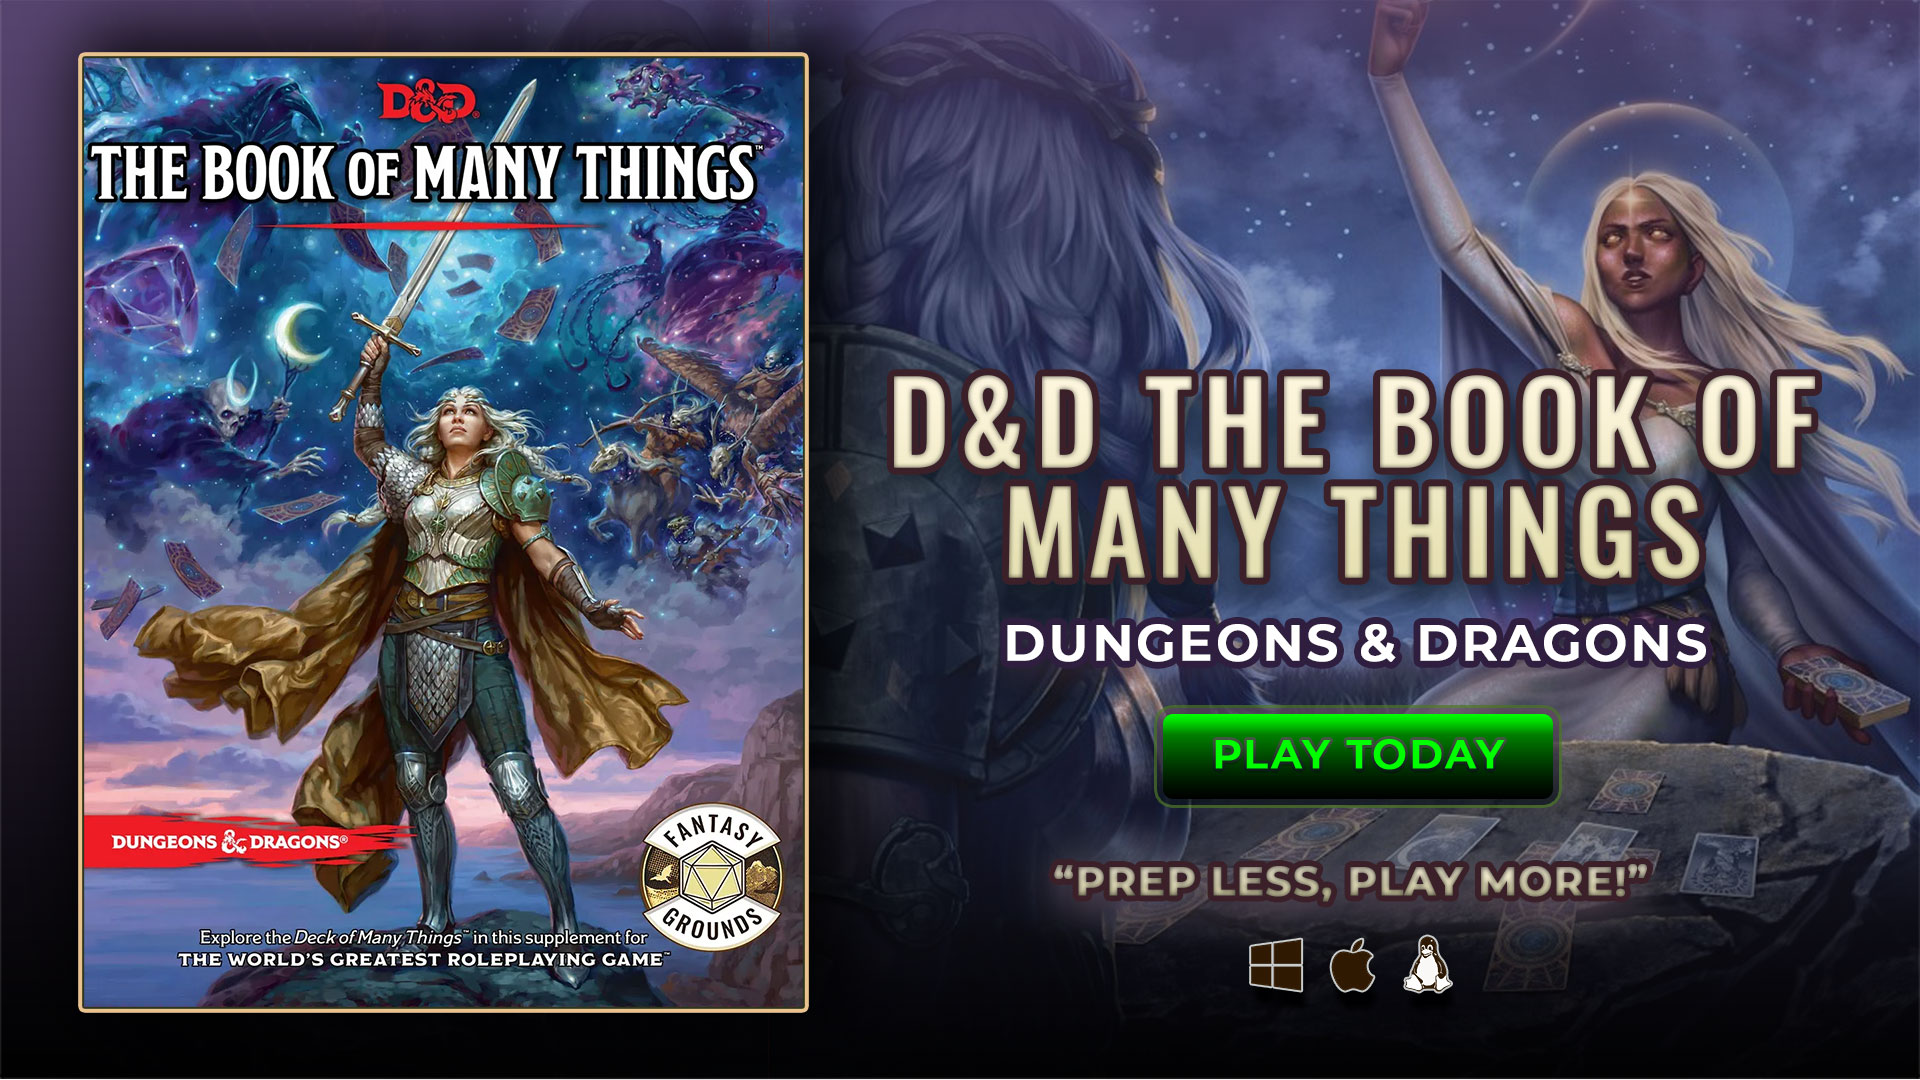 D&D The Book of Many Things (WOTC5ETBOMT).jpg